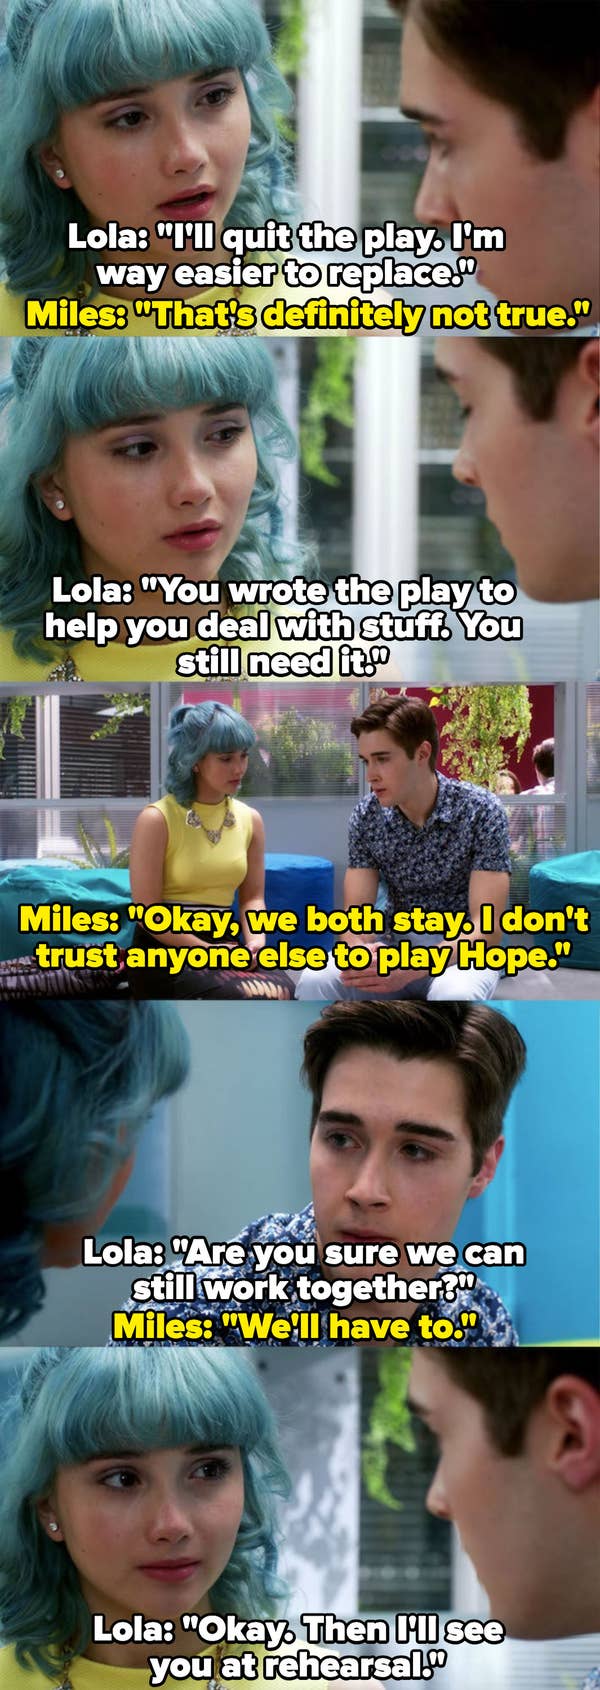 Lola persuades Miles not to quit the play because he still needs it, he says he doesn&#x27;t trust anyone to replace her role, they agree to still work together